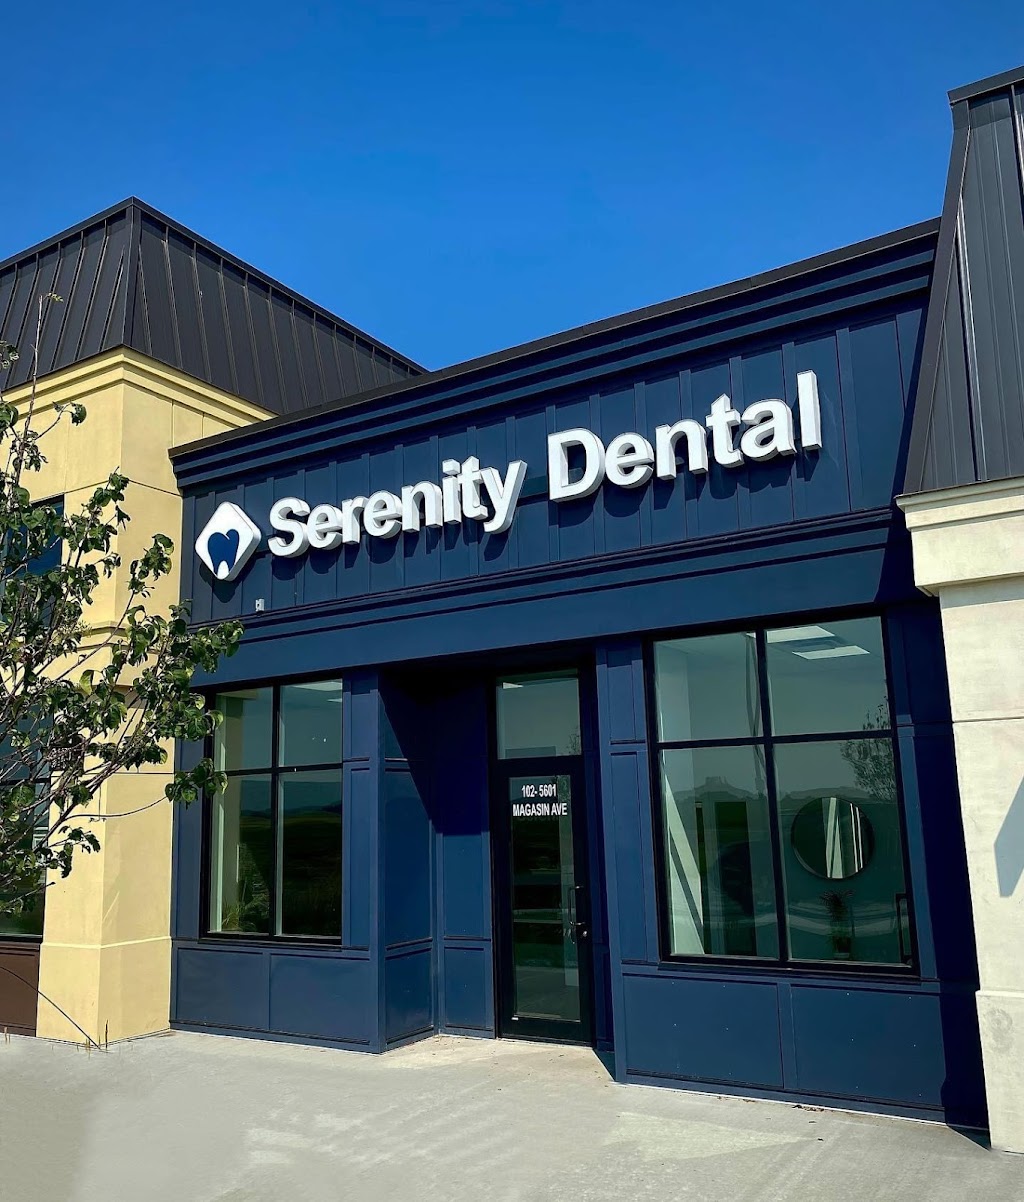 Serenity Dental | dentist | 5601 Magasin Ave #102, Beaumont, AB T4X 1V8, Canada | 7809294138 OR +1 780-929-4138